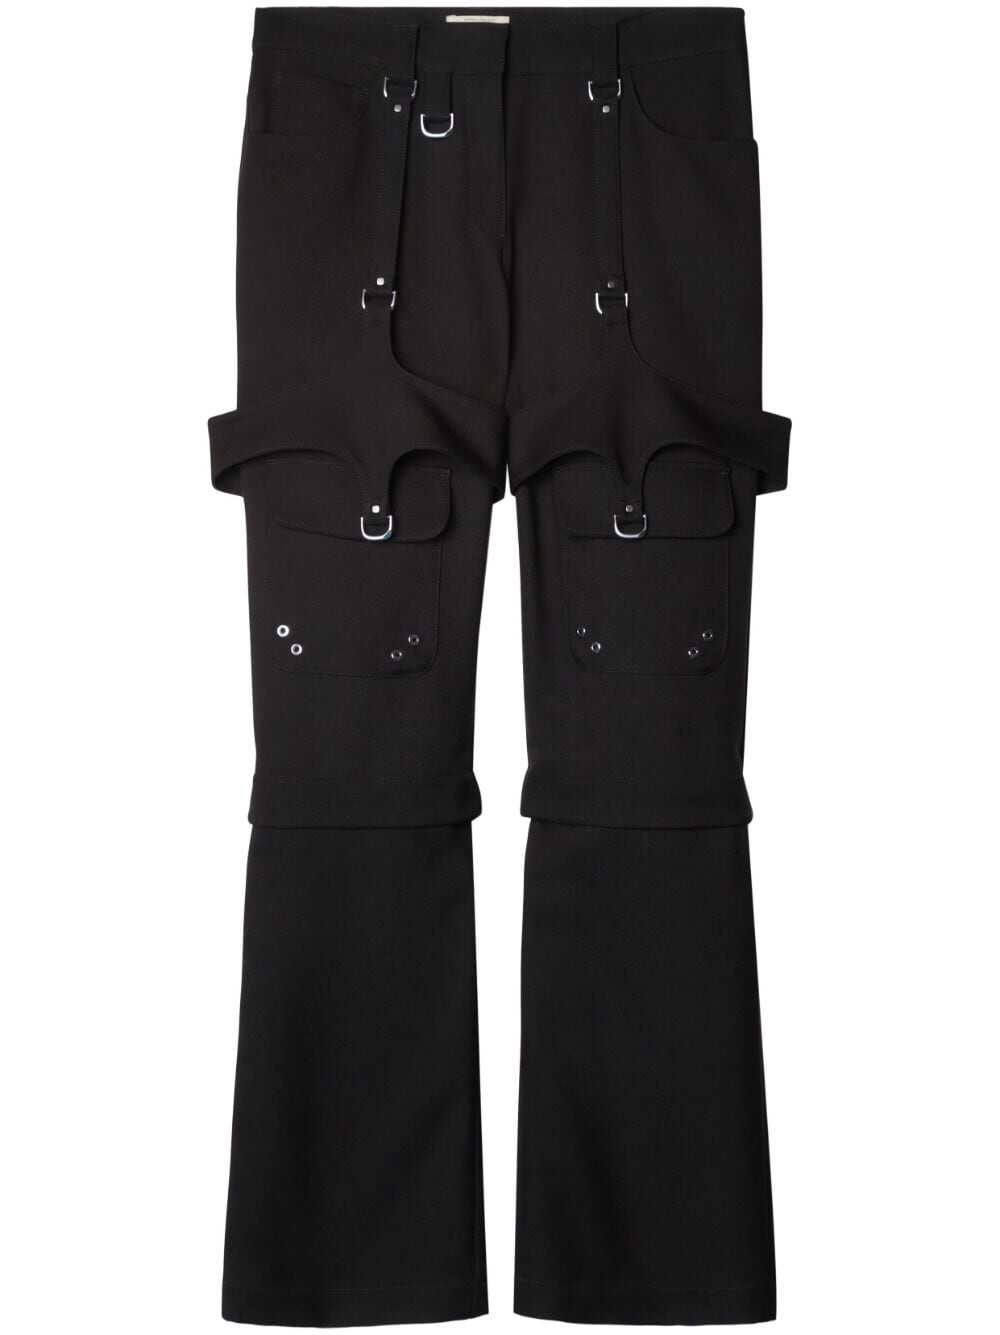 OFF-WHITE KIDS Wool blend trouser with straps detail Black